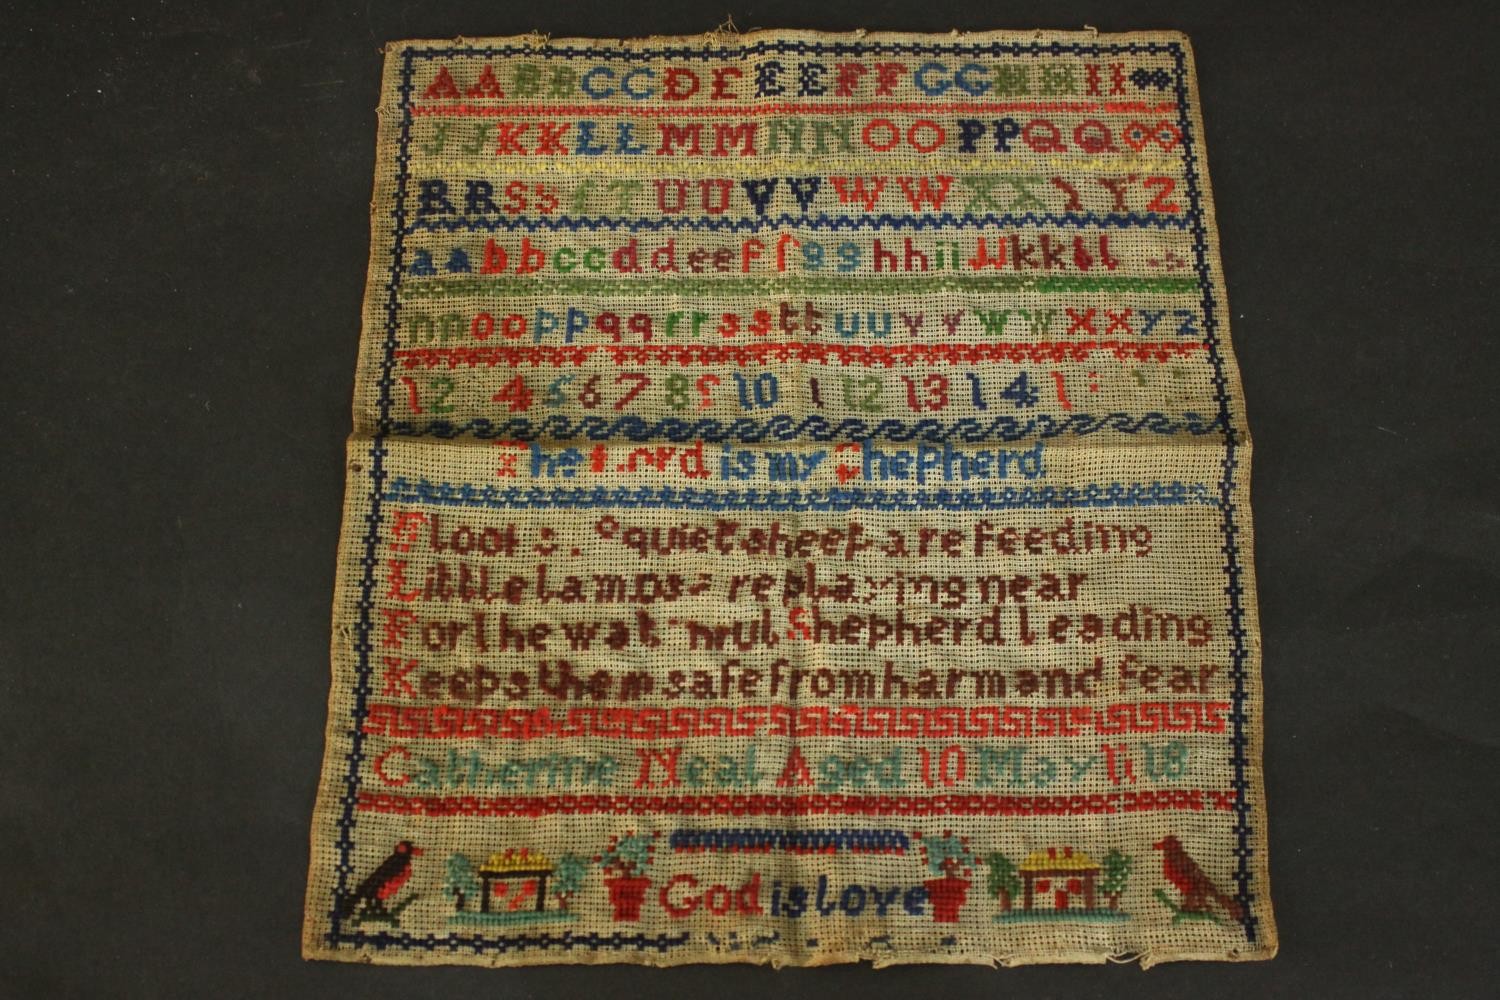 Three unframed 19th century embroidered samplers. Each with the name of the artist and date they - Image 4 of 8